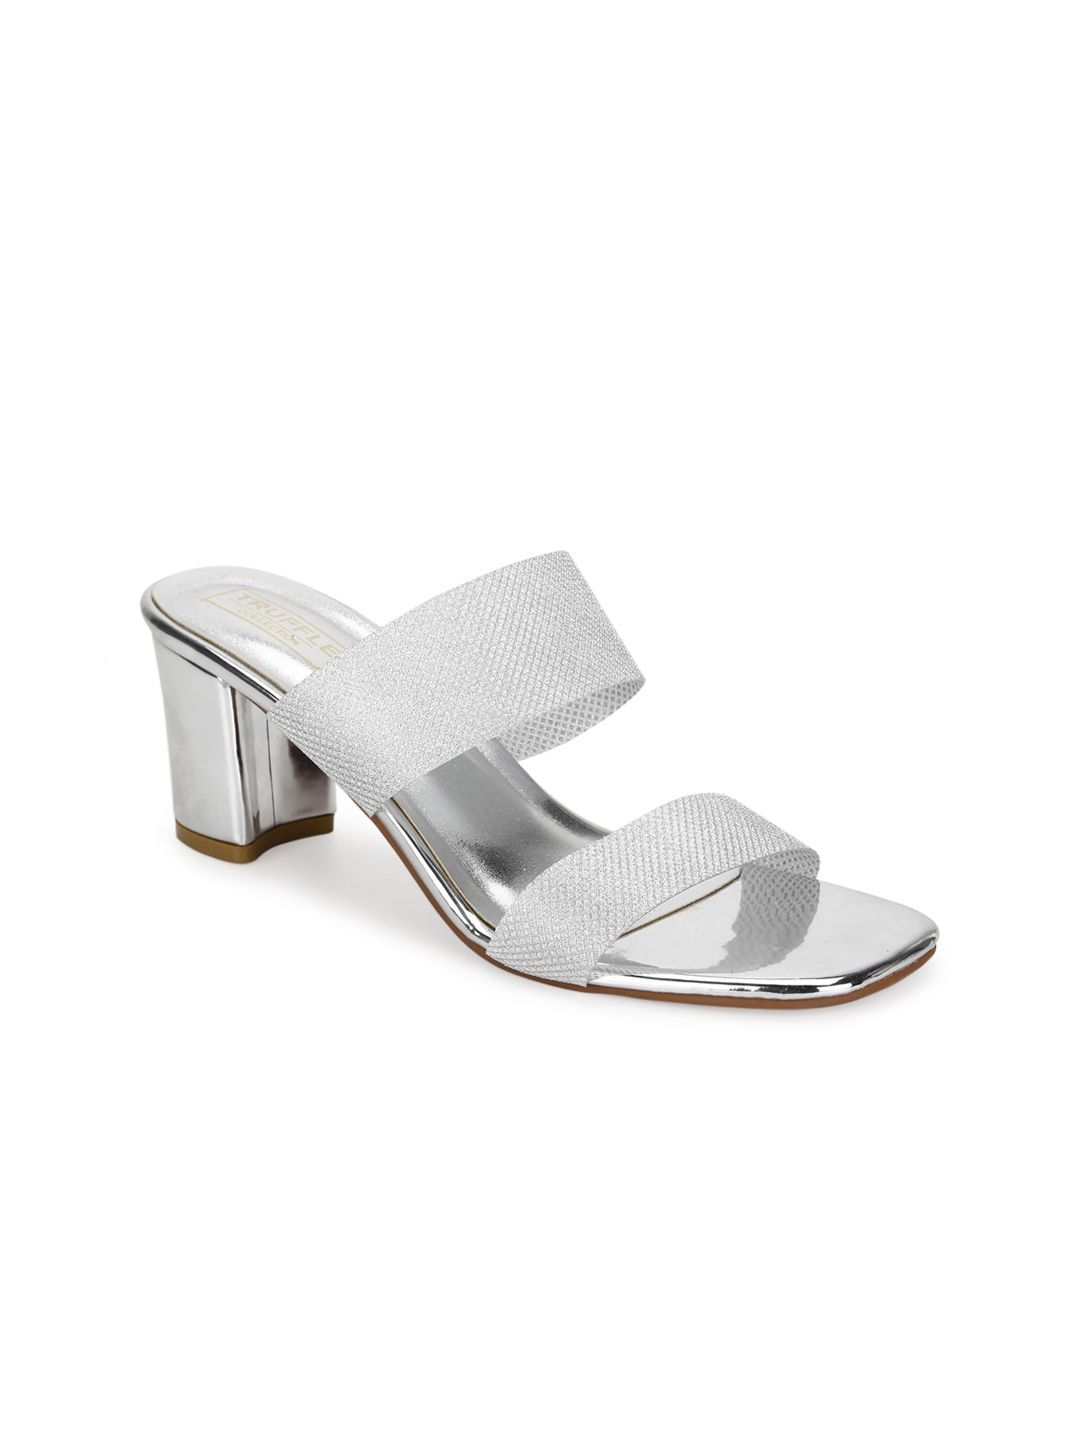 Truffle Collection Silver-Toned PU Block Sandals Price in India